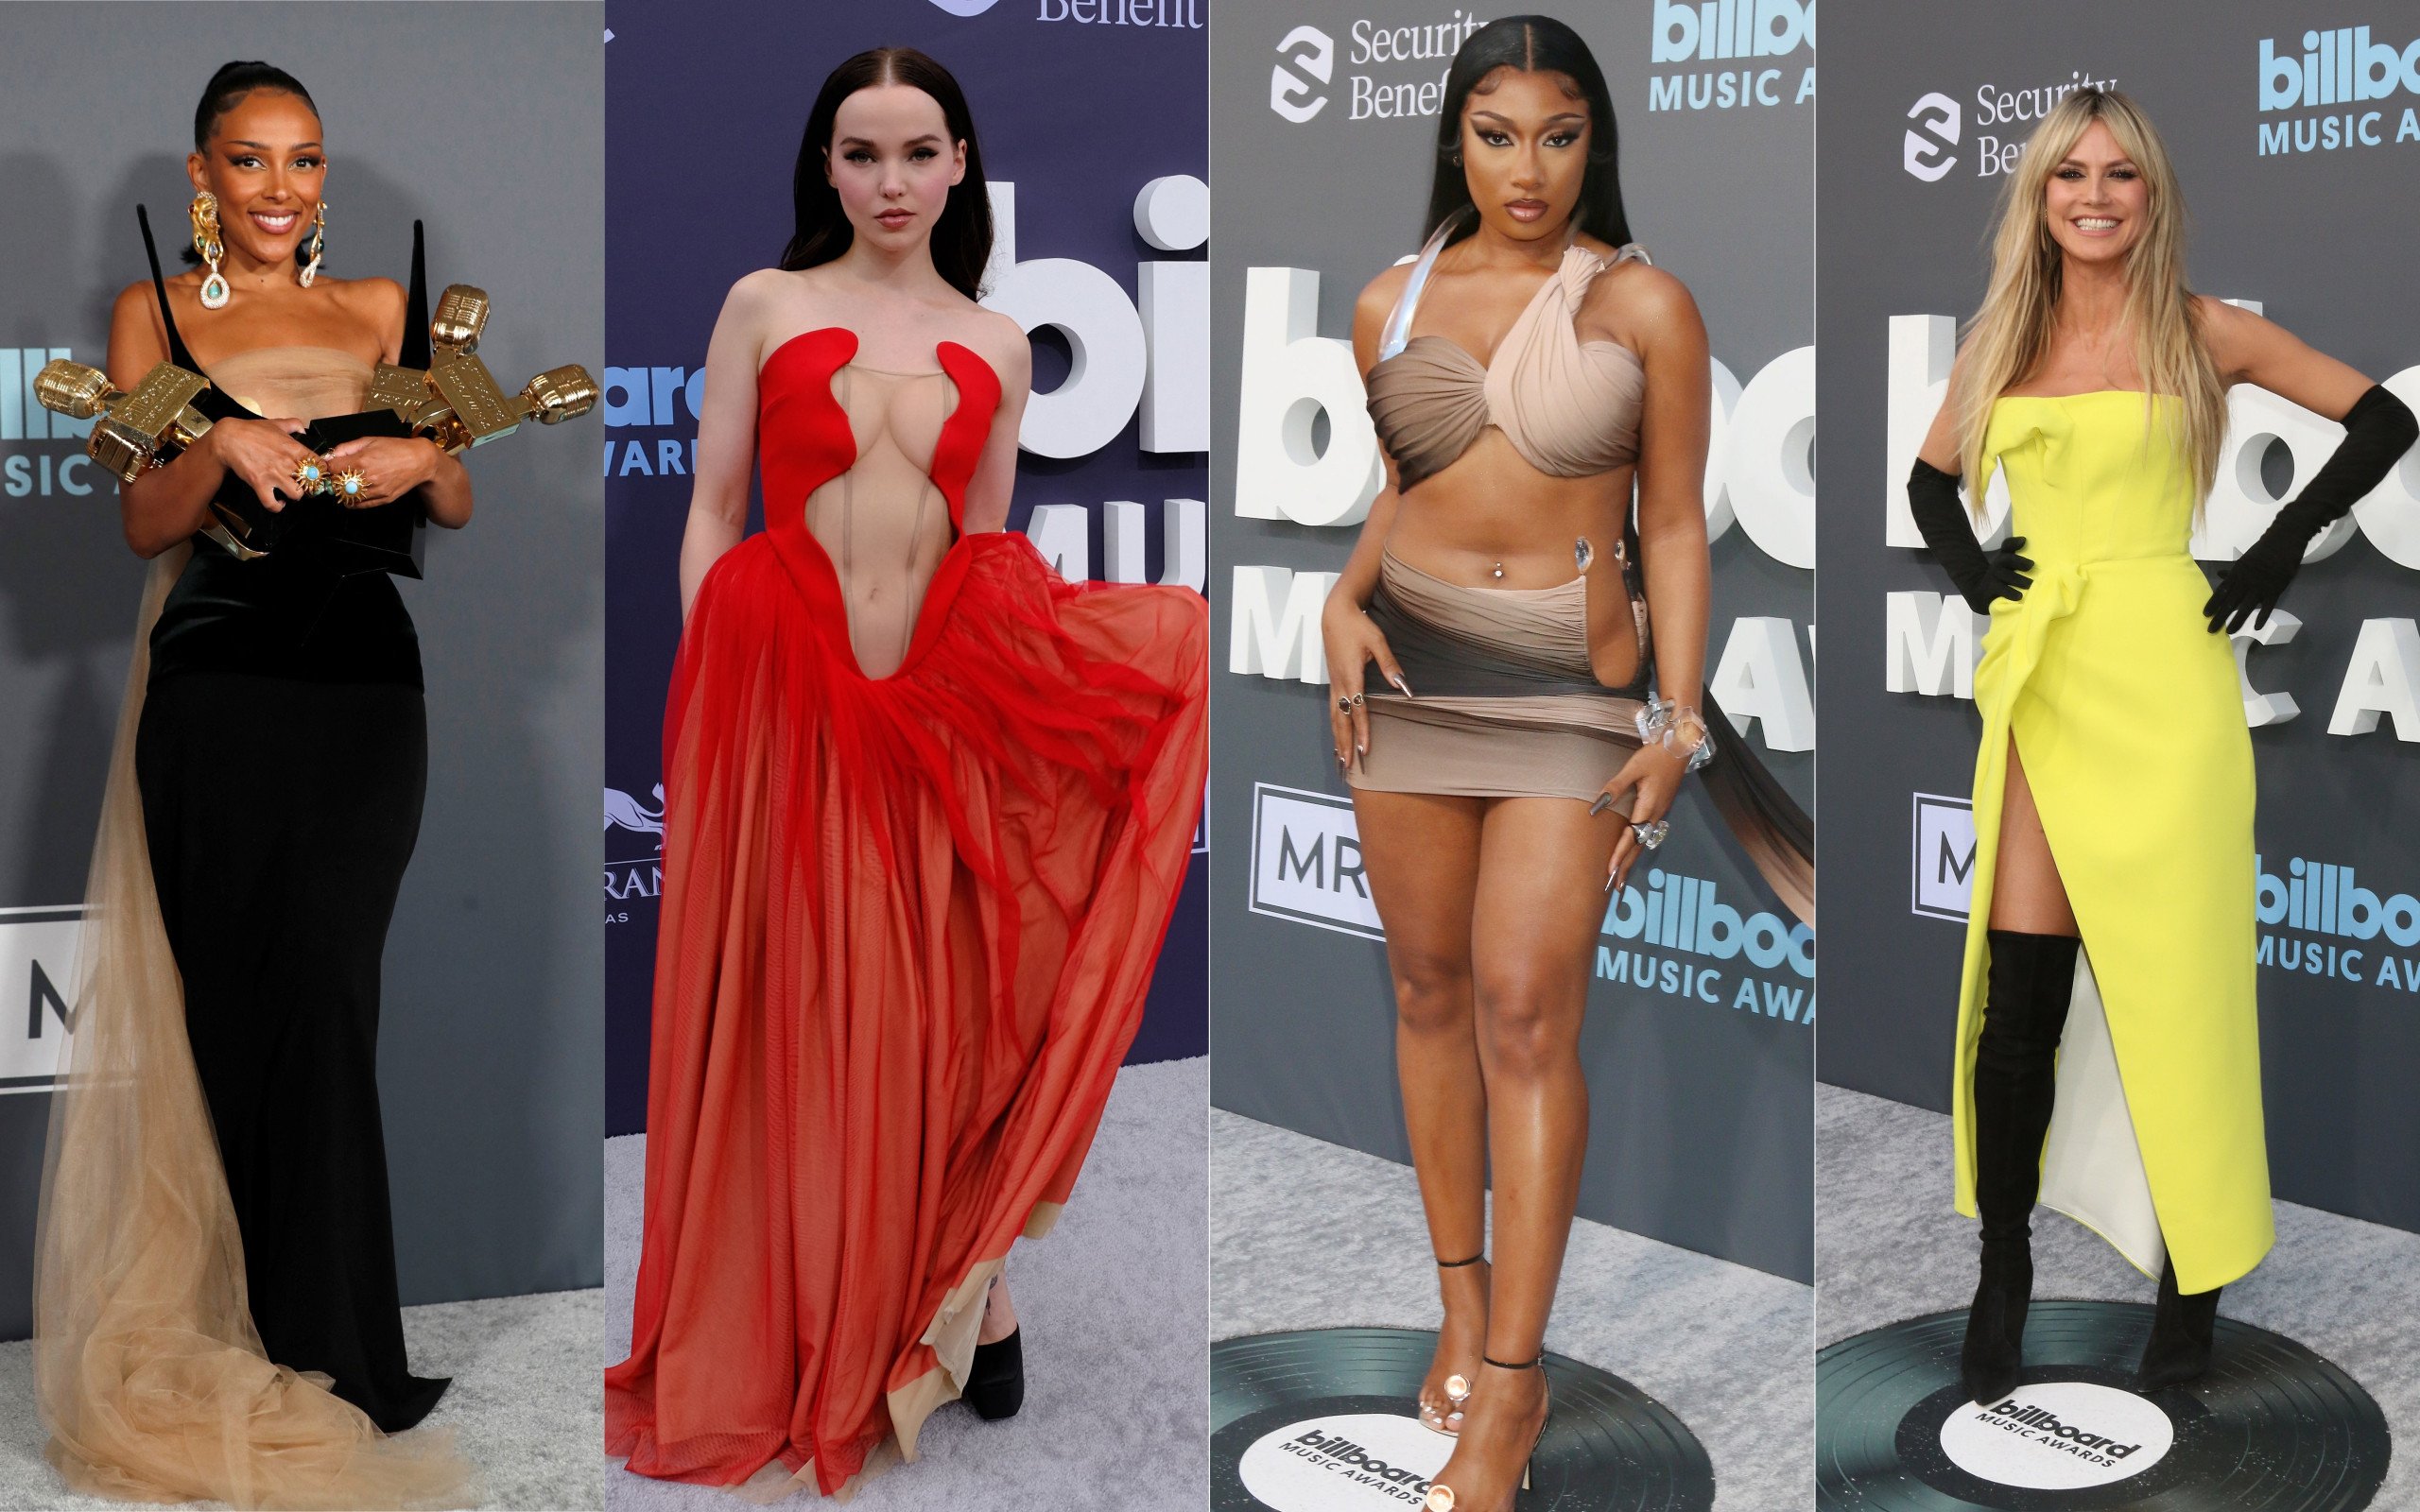 Doja Cat (far left) deserves an award for her Billboard Music Awards look, but Dove Cameron and Megan Thee Stallion made our worst dressed list. And what about Heidi Klum’s screaming yellow (far right)? Photos: Wires